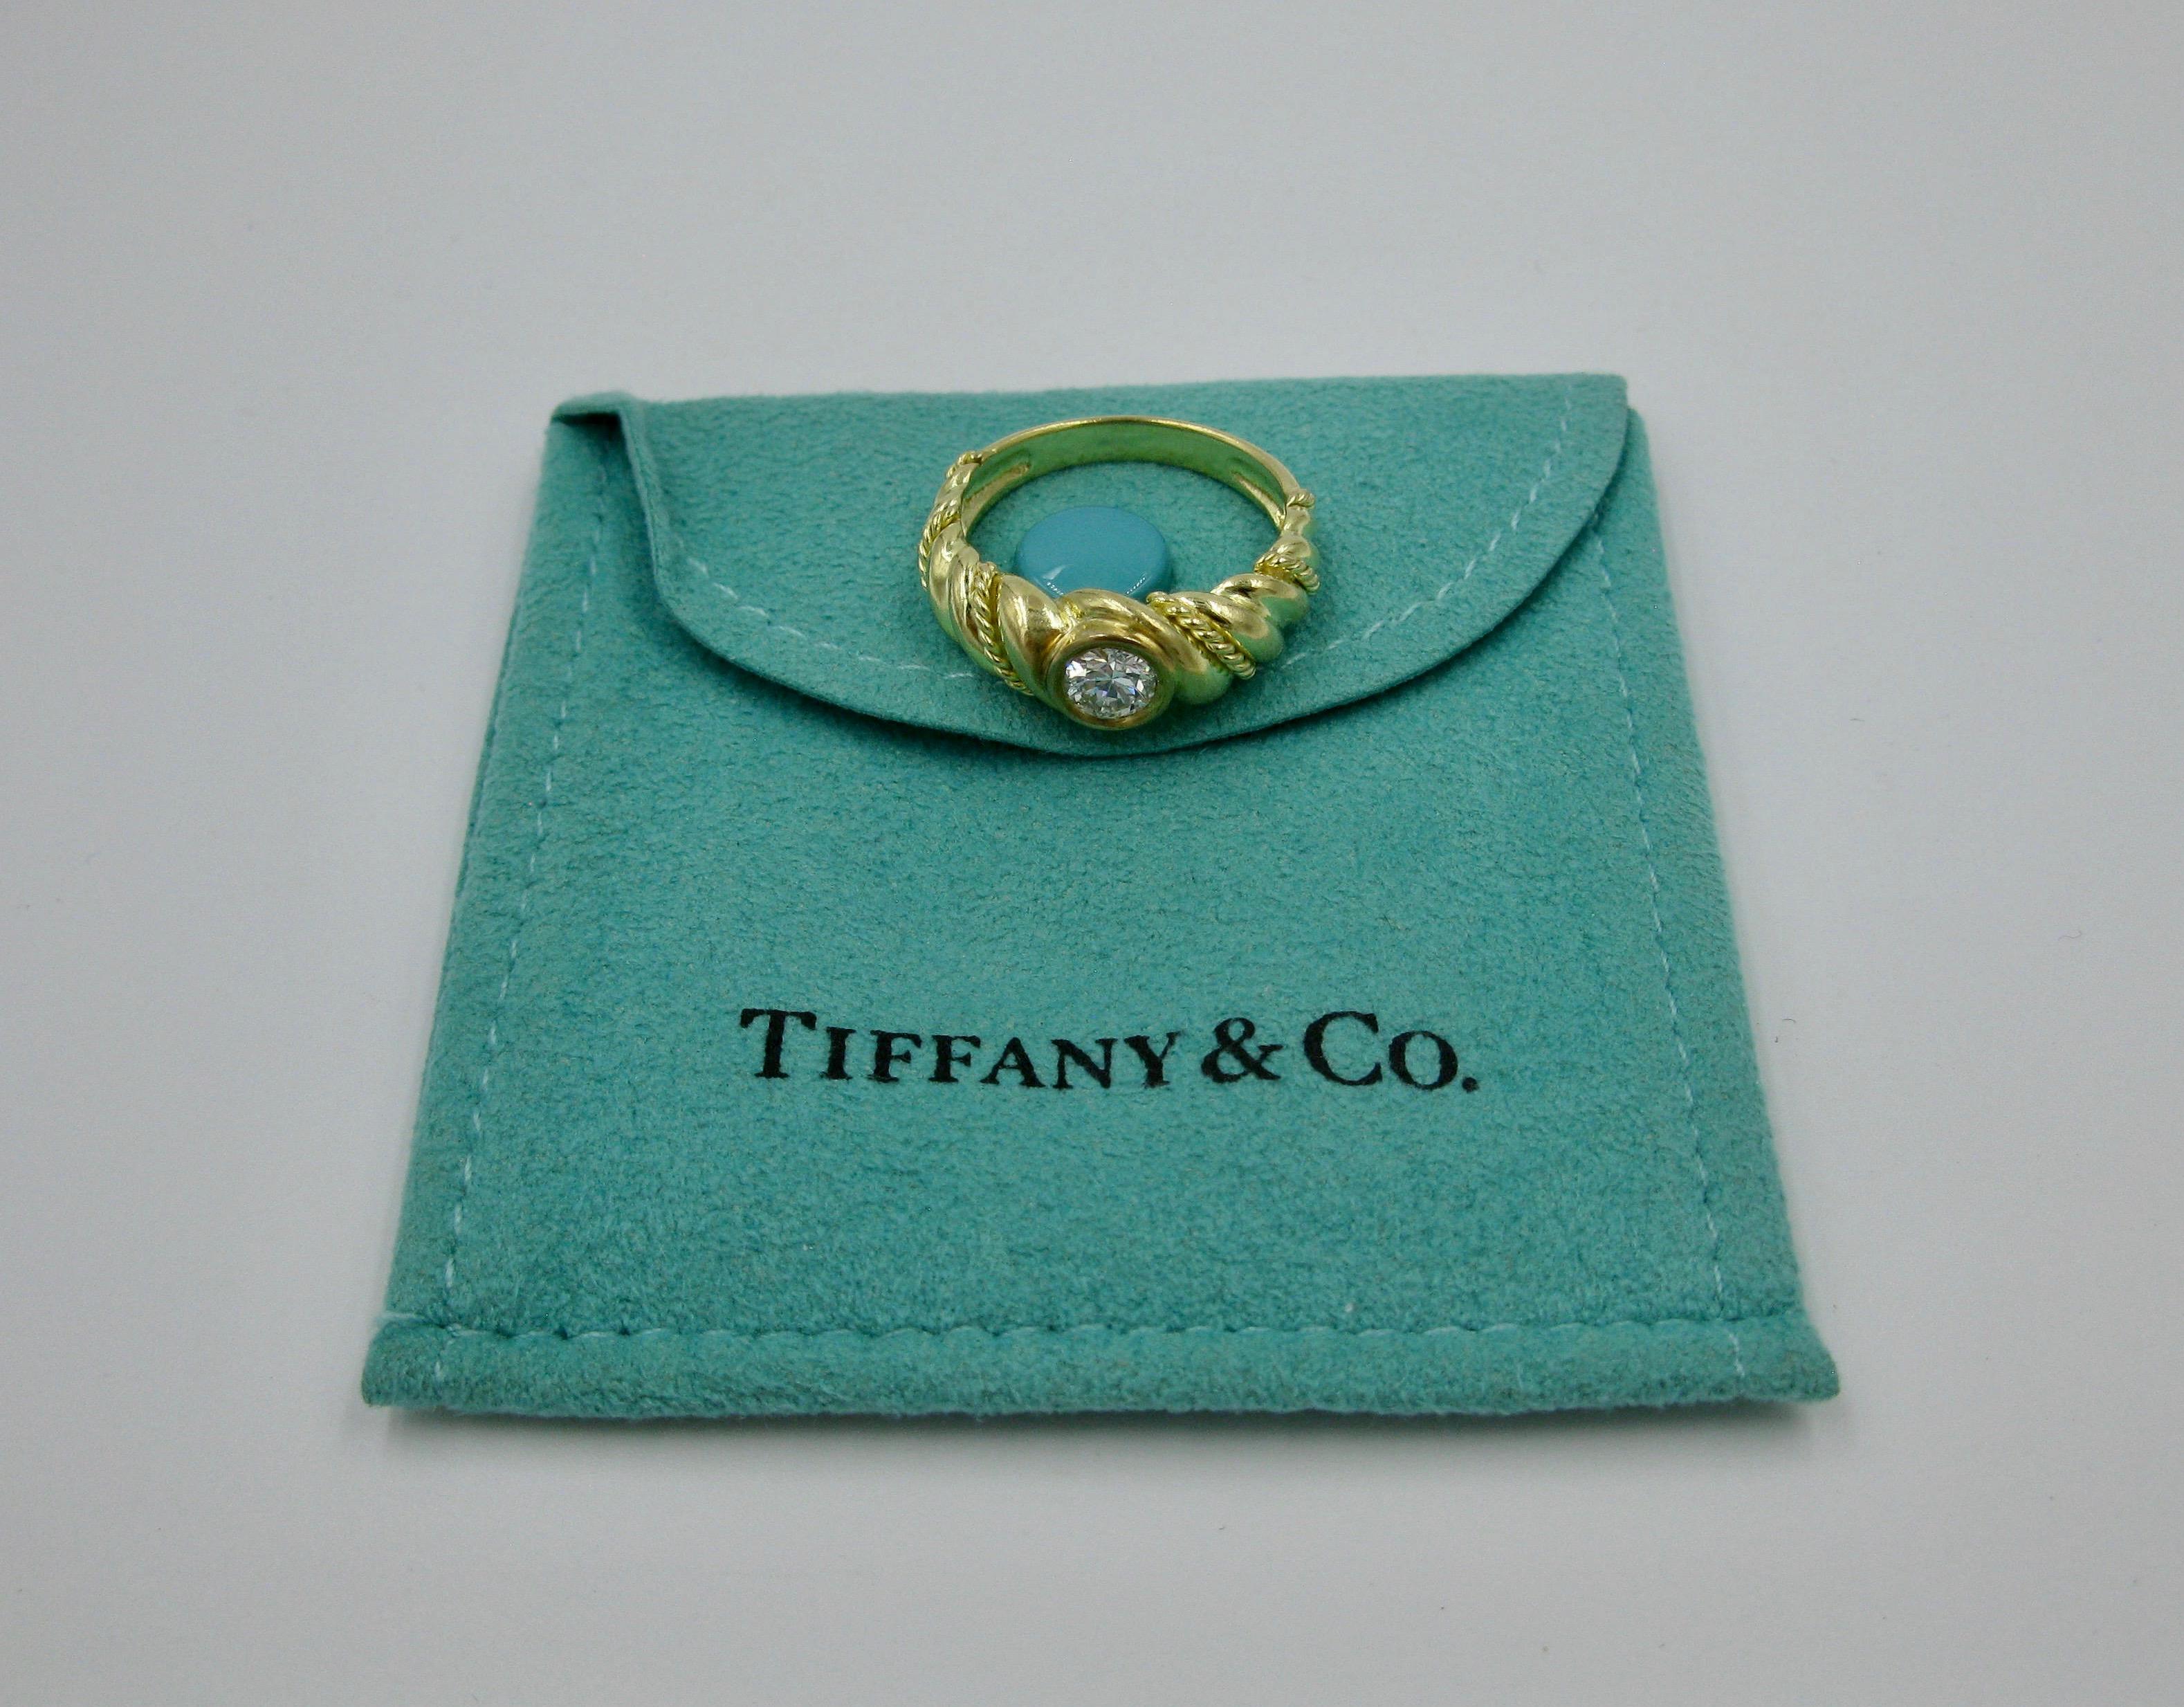 This is one of the most beautiful Yellow Gold Tiffany & Co. Wedding Engagement Rings we have seen with a 1/2 Carat Round Brilliant Cut Tiffany Diamond.  This gorgeous Tiffany diamond is E color, VERY white!  The diamond is VS clarity which is